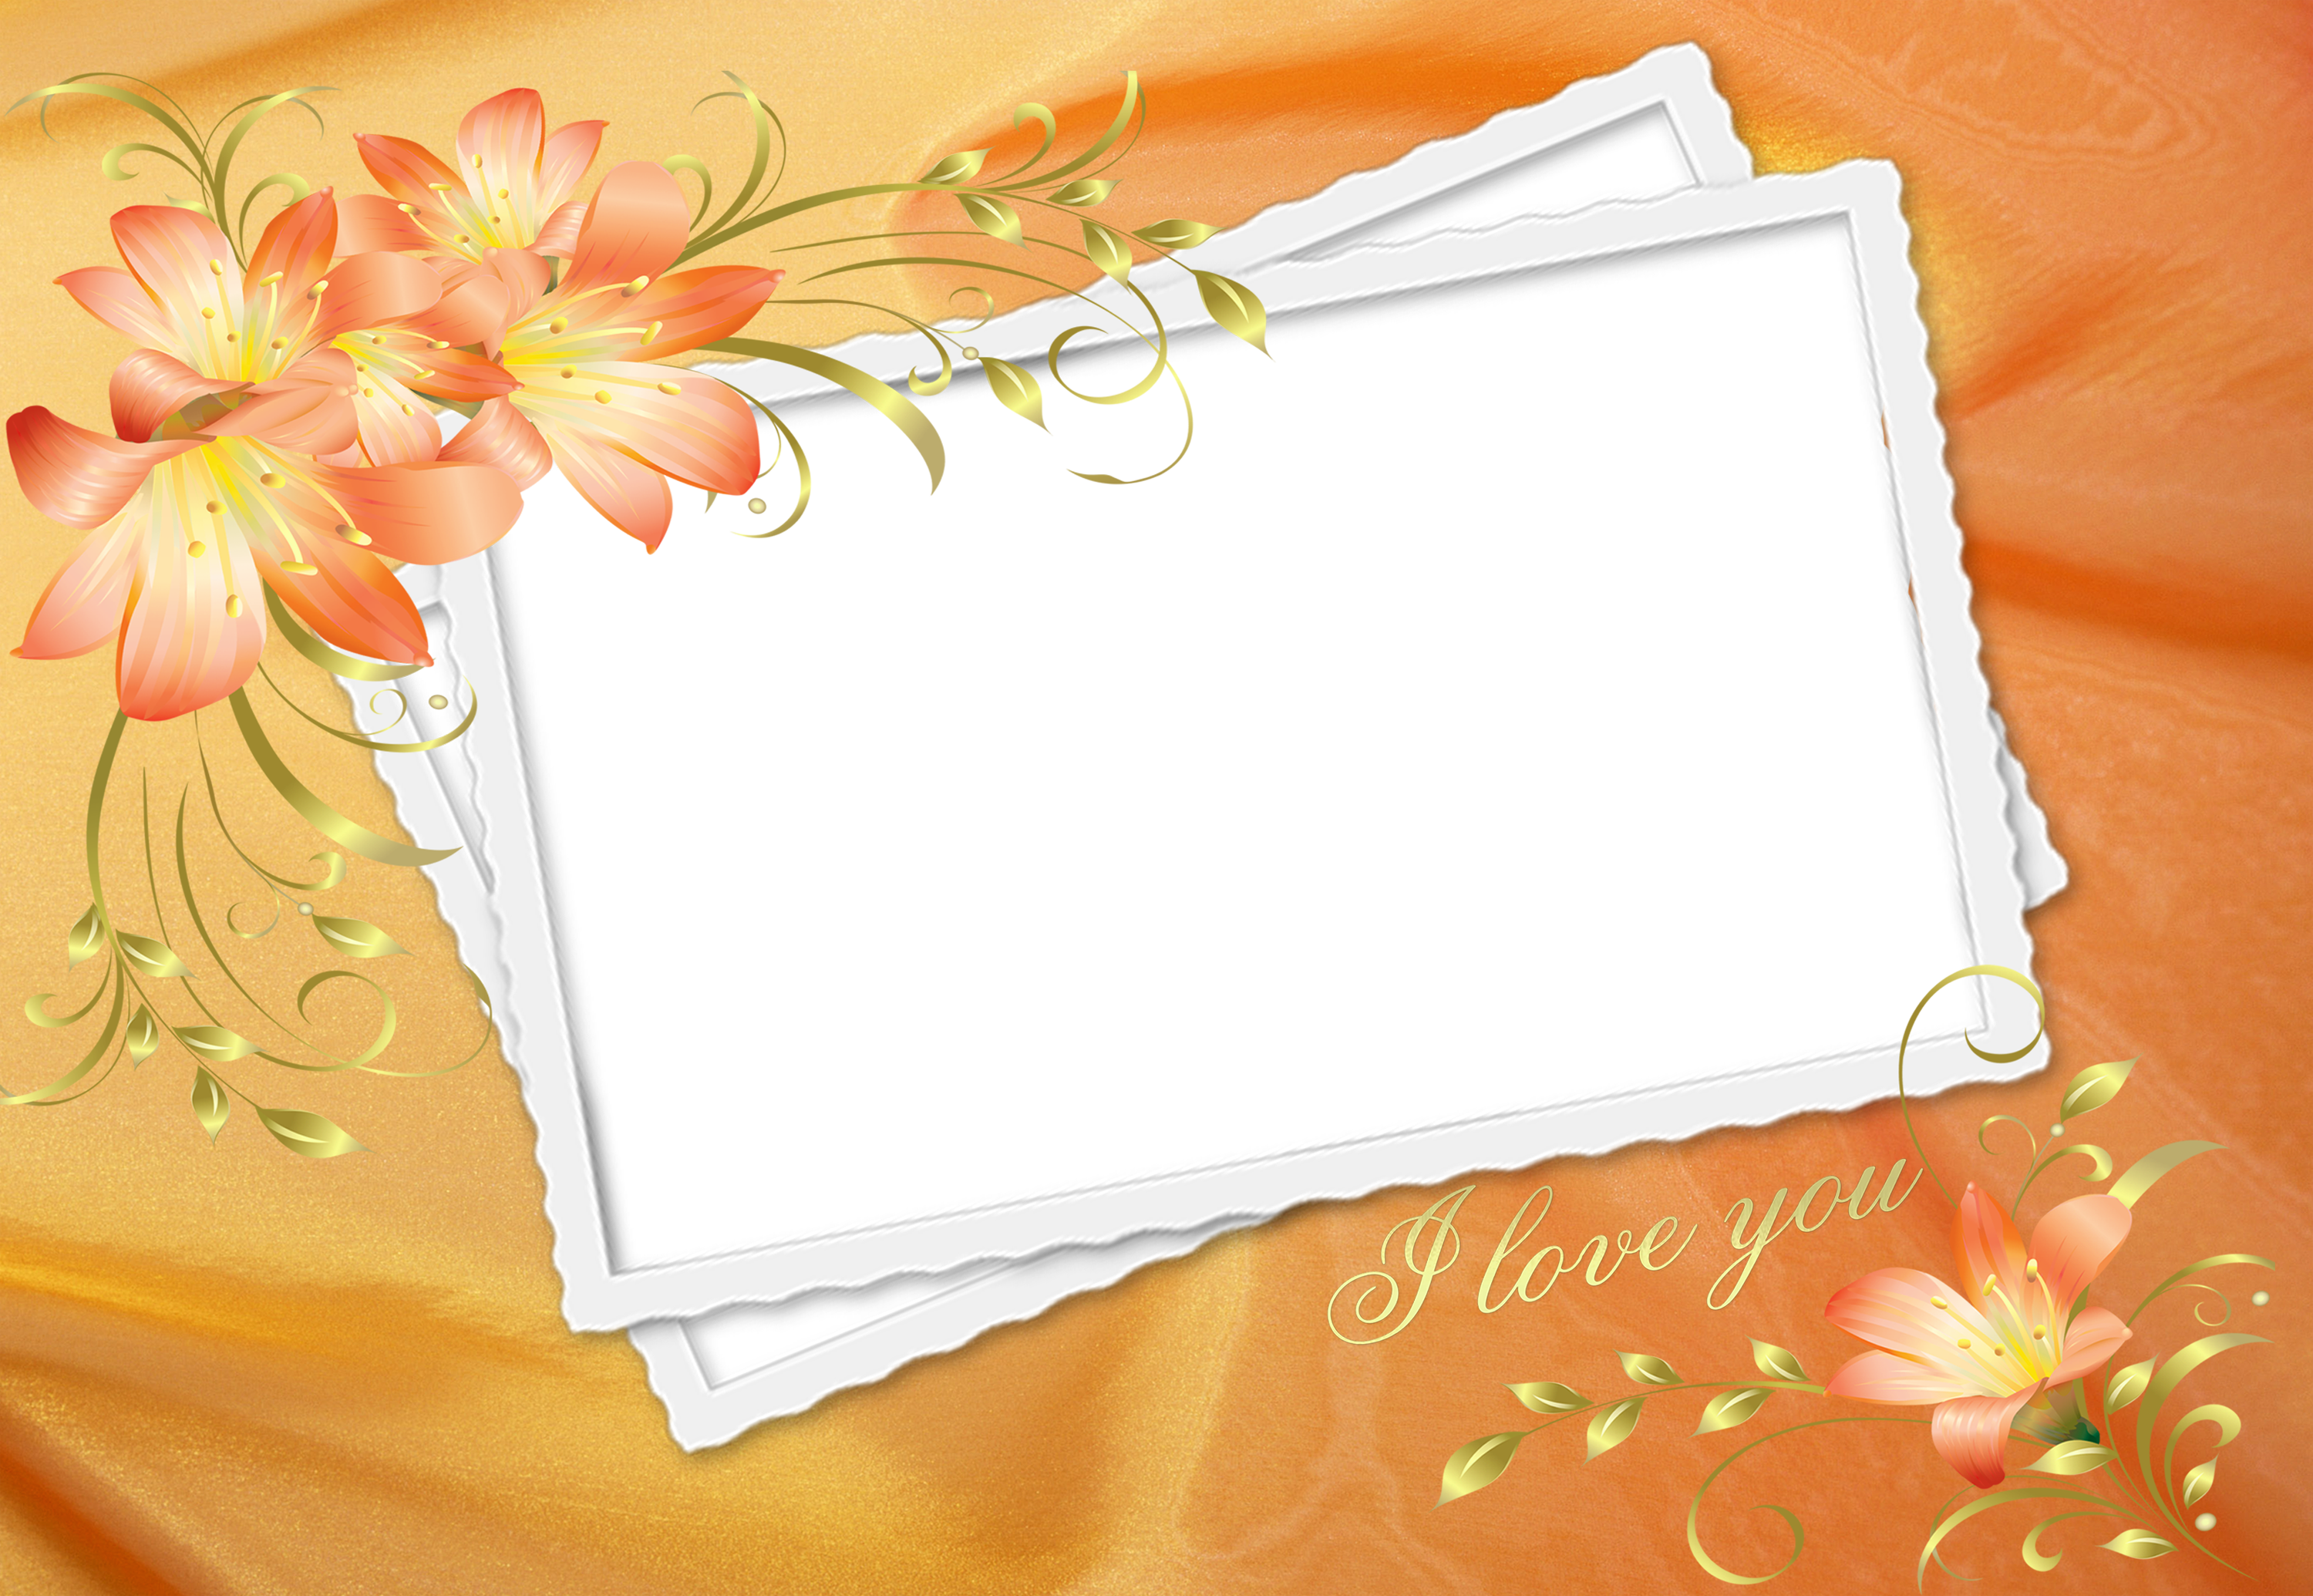 I Love You Frame Wallpapers High Quality - Love You Frame Png (3000x2070)